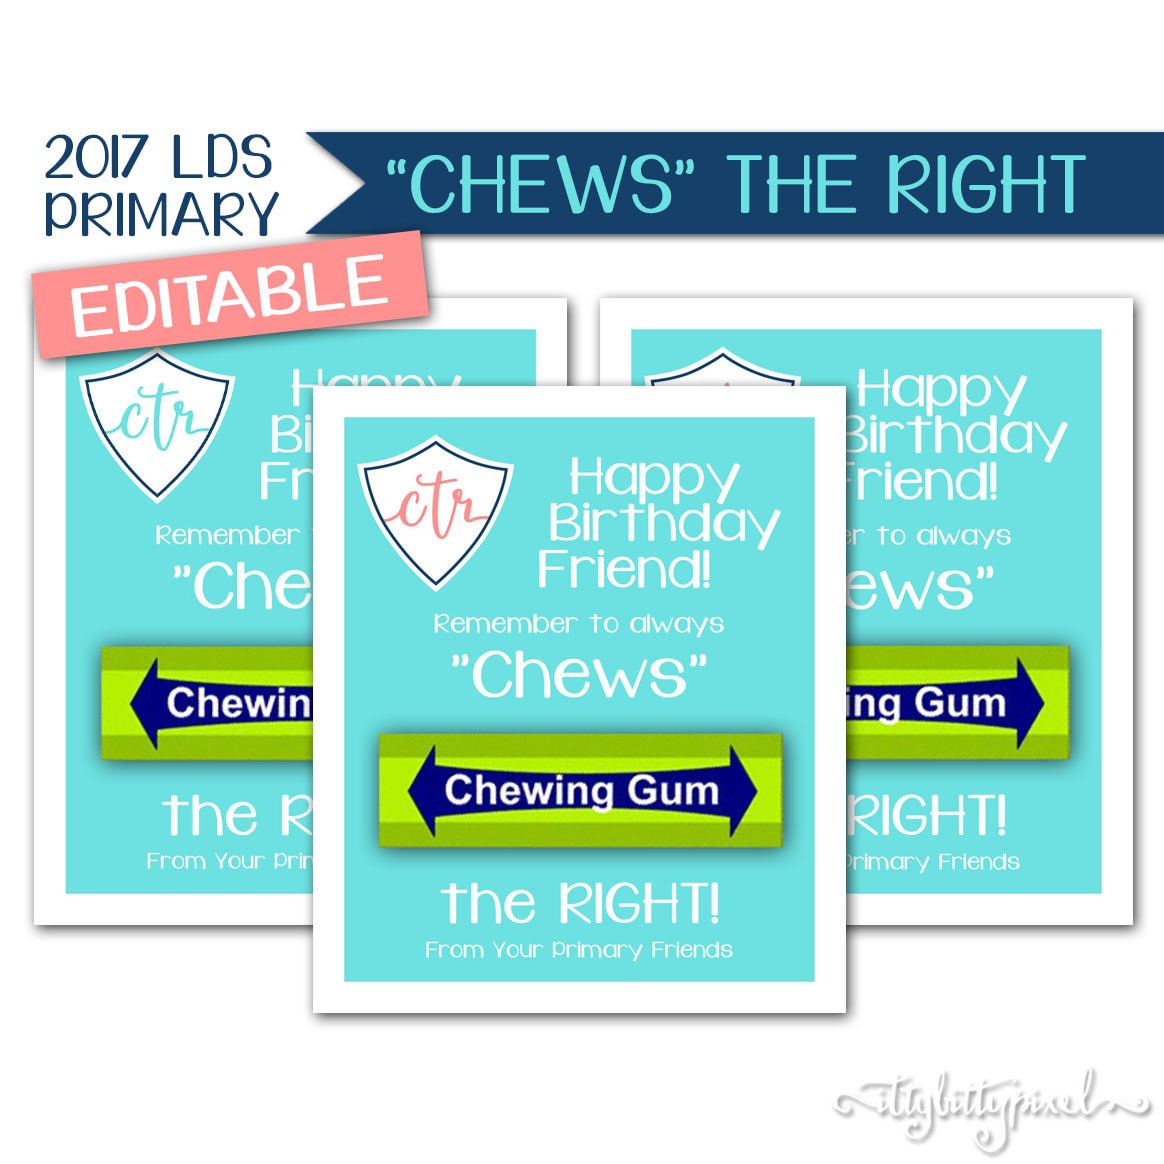 chews-the-right-handout-lds-primary-2017-theme-editable